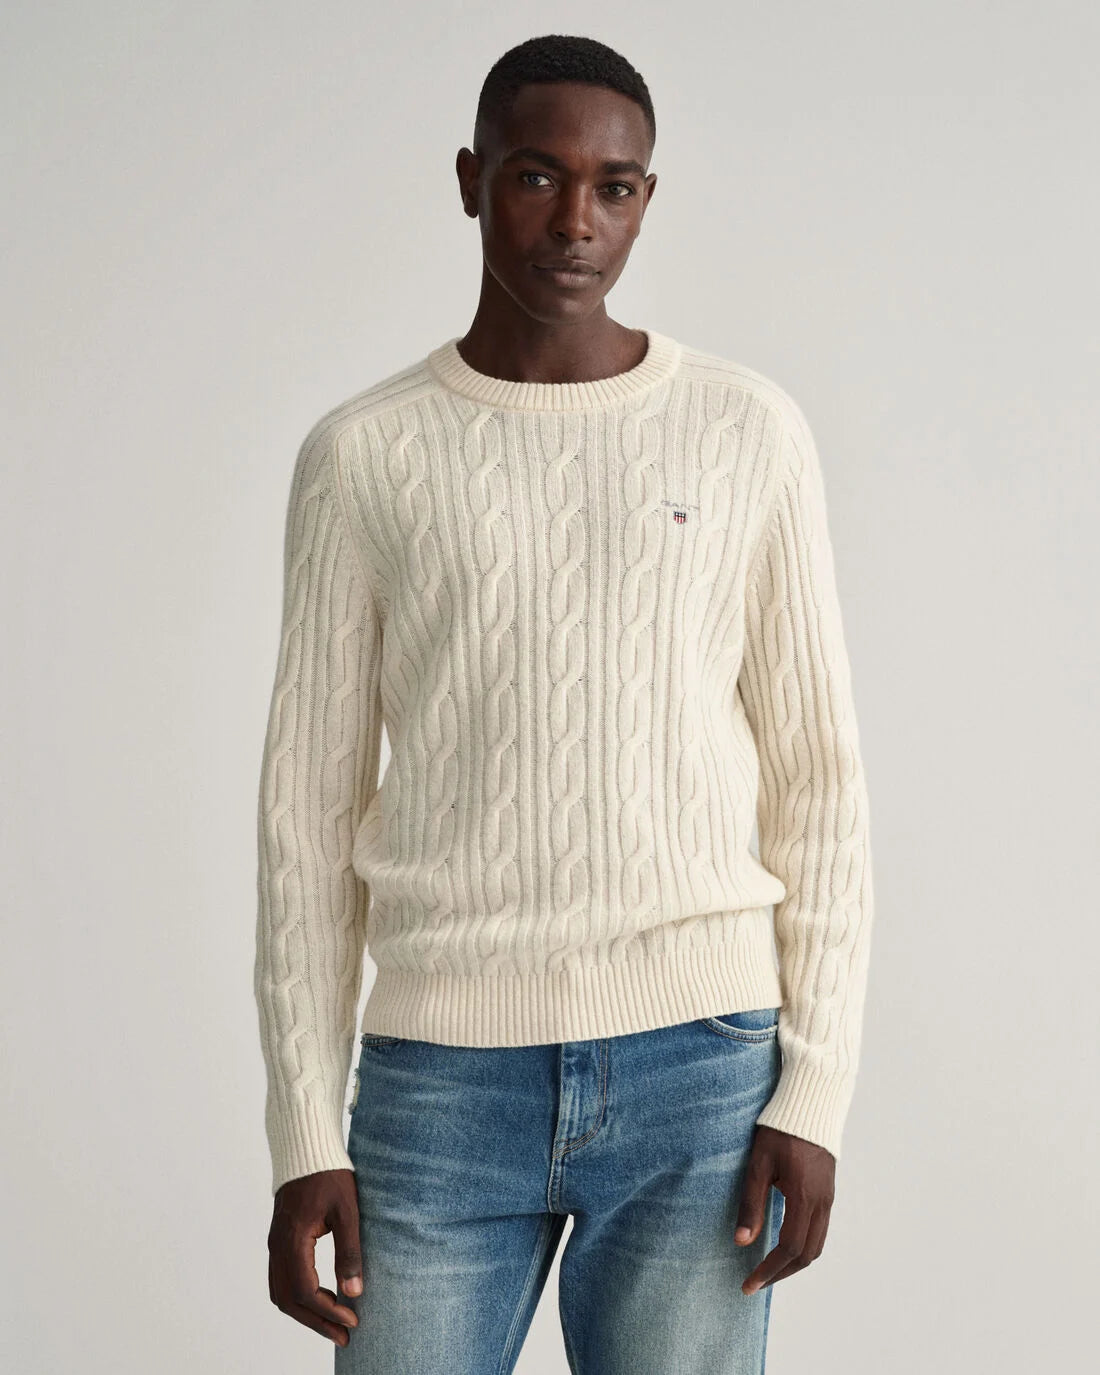 Offwhite woolen cable crew neck pullover Gant - 8050123/130